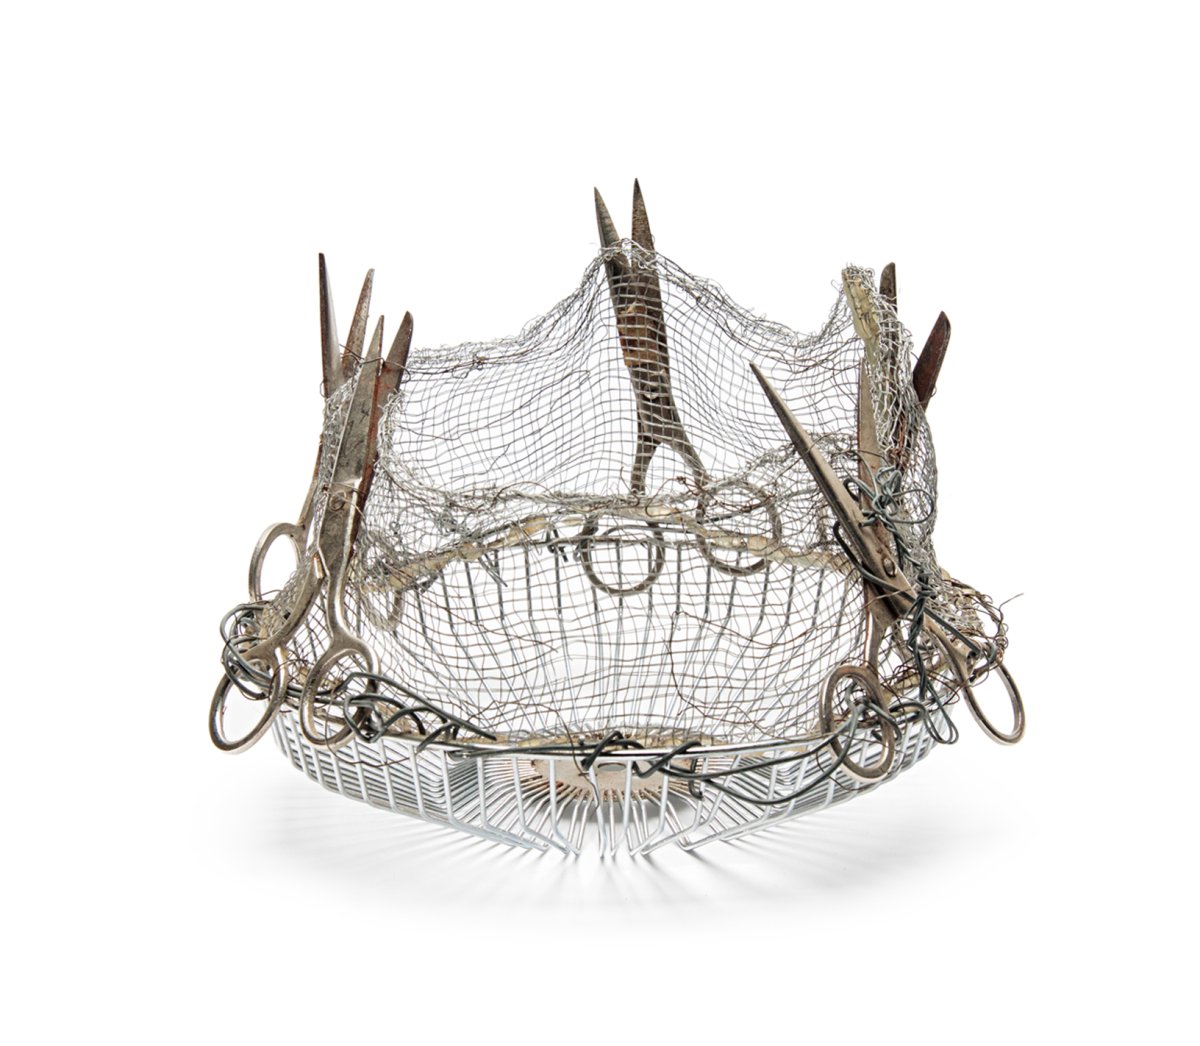 Included in Indie Folk: New Art and Sounds from the Pacific Northwest is Seattle multimedia artist Marita Dingus’s Scissor Basket, 2003, scissors, found metals, 6 x 9 x 9 in. Photo courtesy of the artist and Traver Gallery, Seattle.